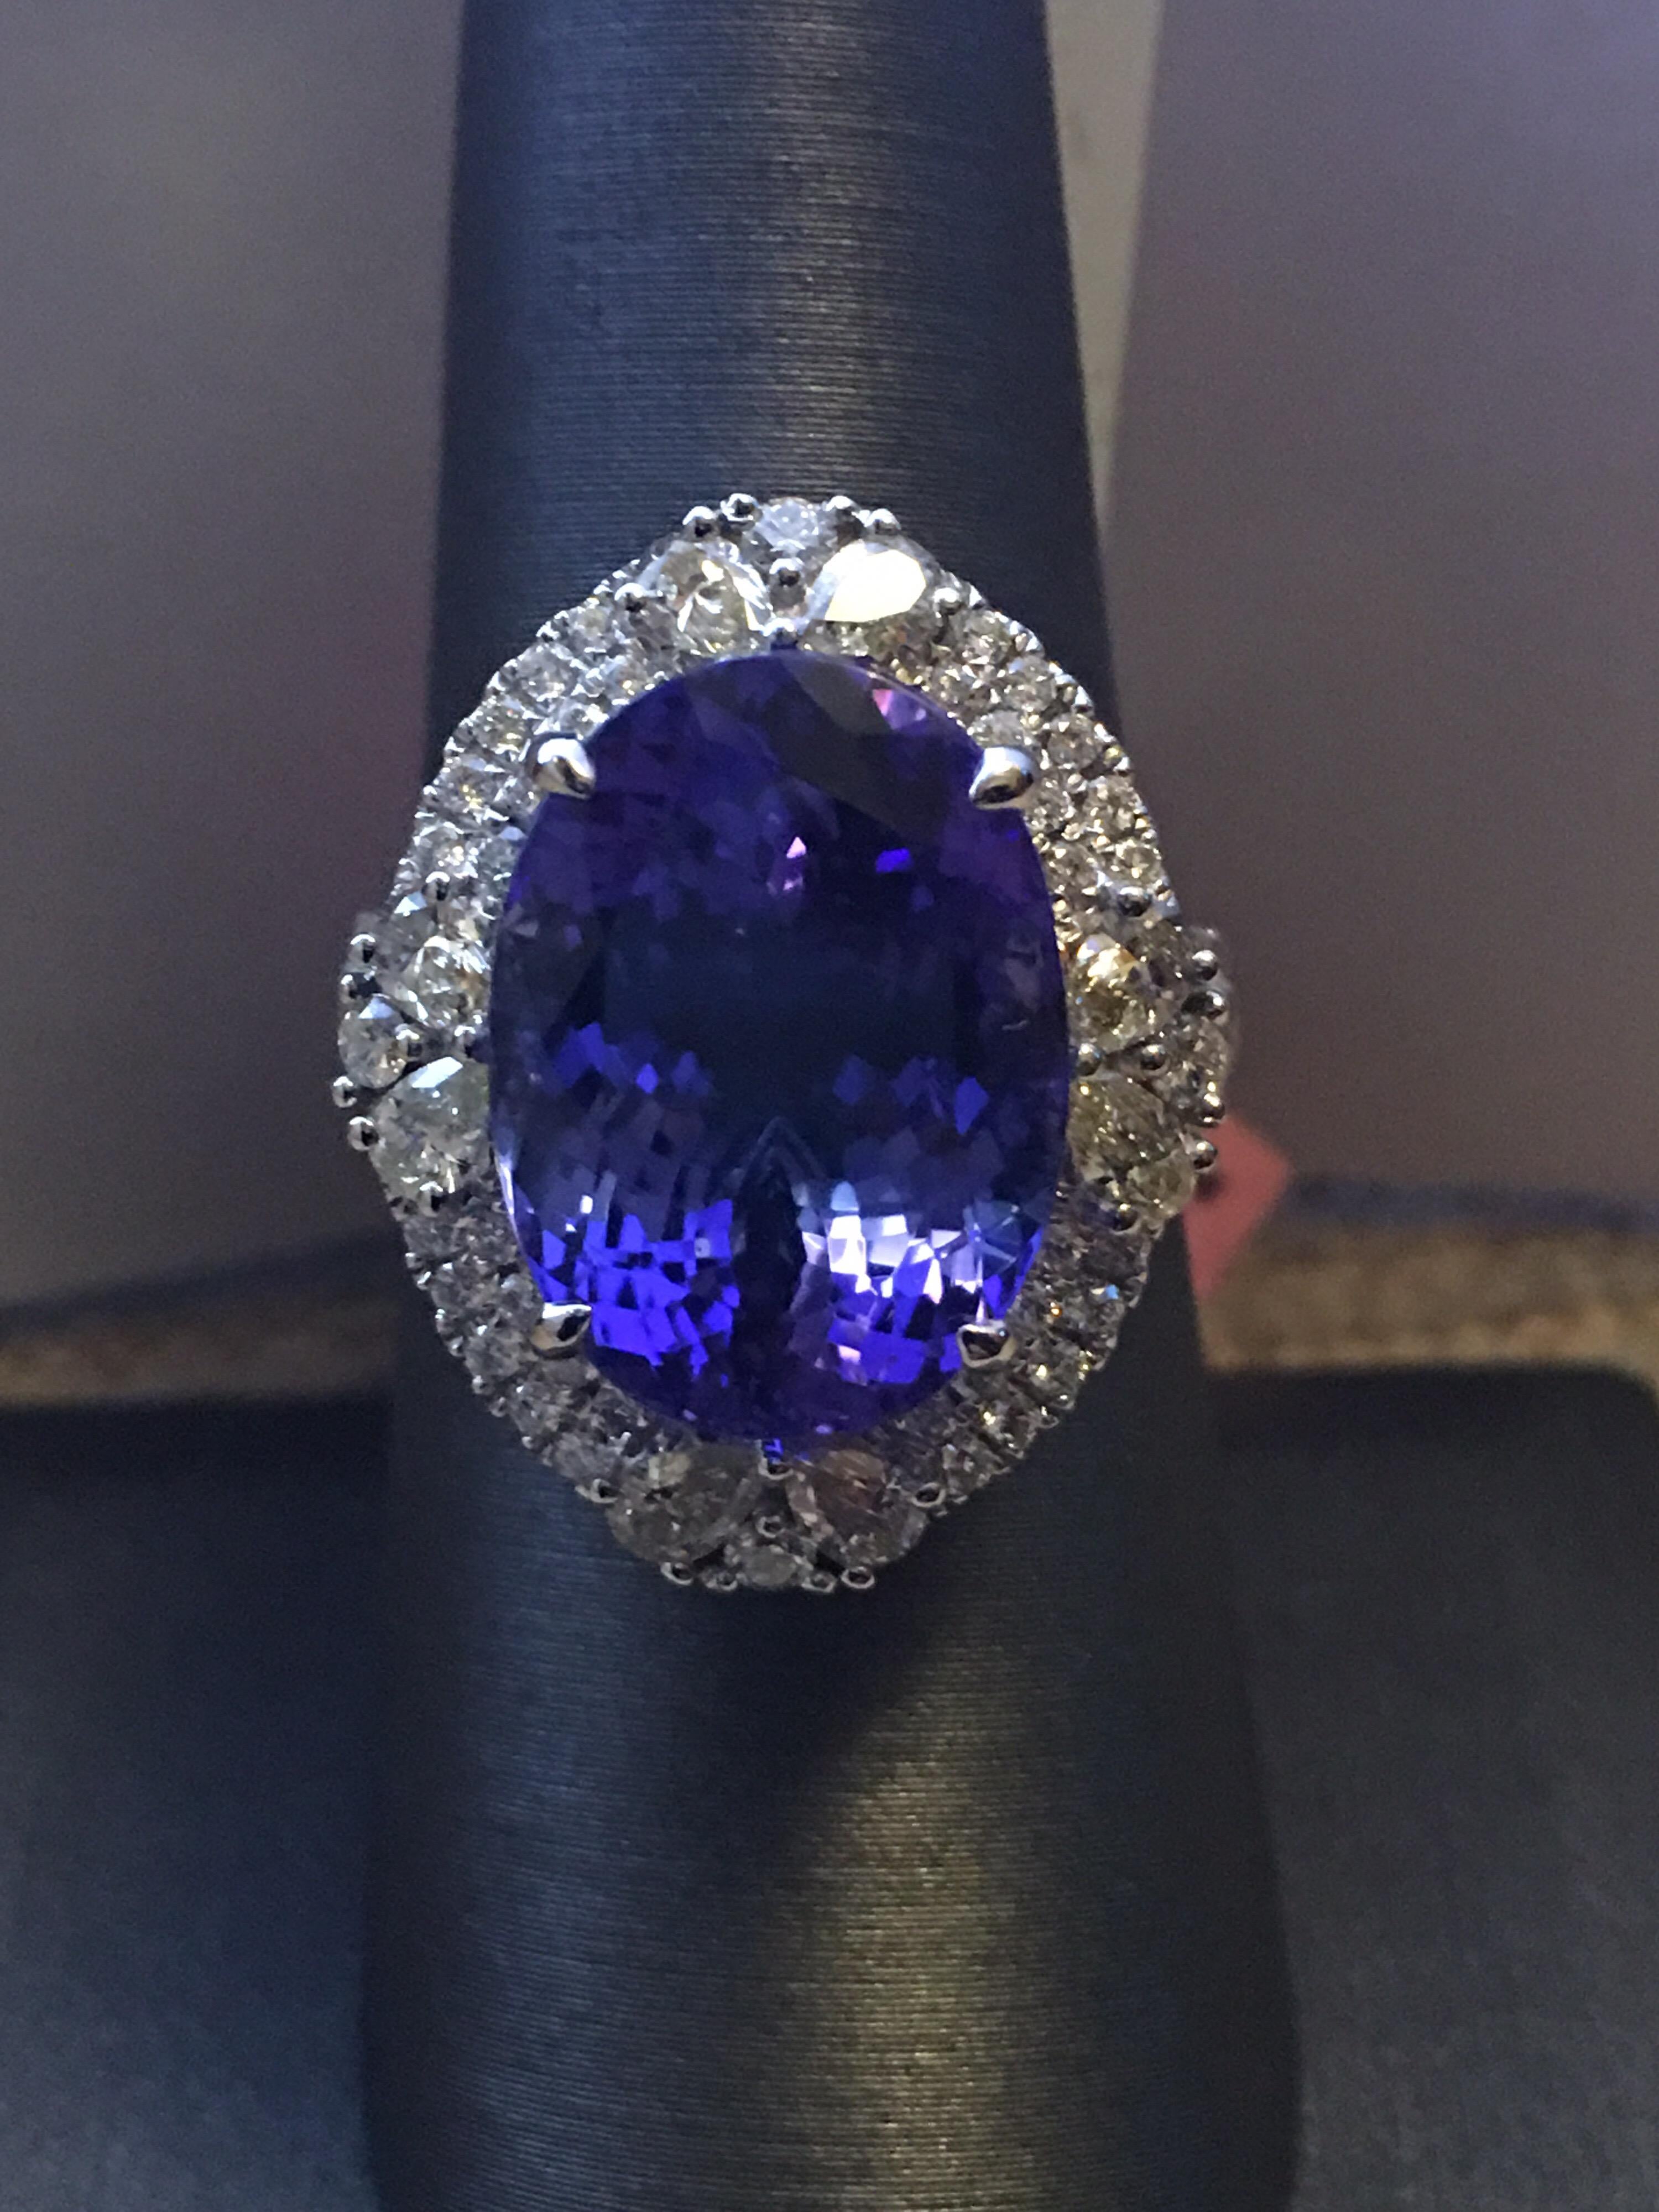 Natural Oval Tanzanite Set In 18 Karat White gold is size 7 Ring. AAA quality Royal Ink Blue Tanzanite is 10.48 Carat and total weight of Diamond is 1.39 Carat.
You can resize the ring if needed.